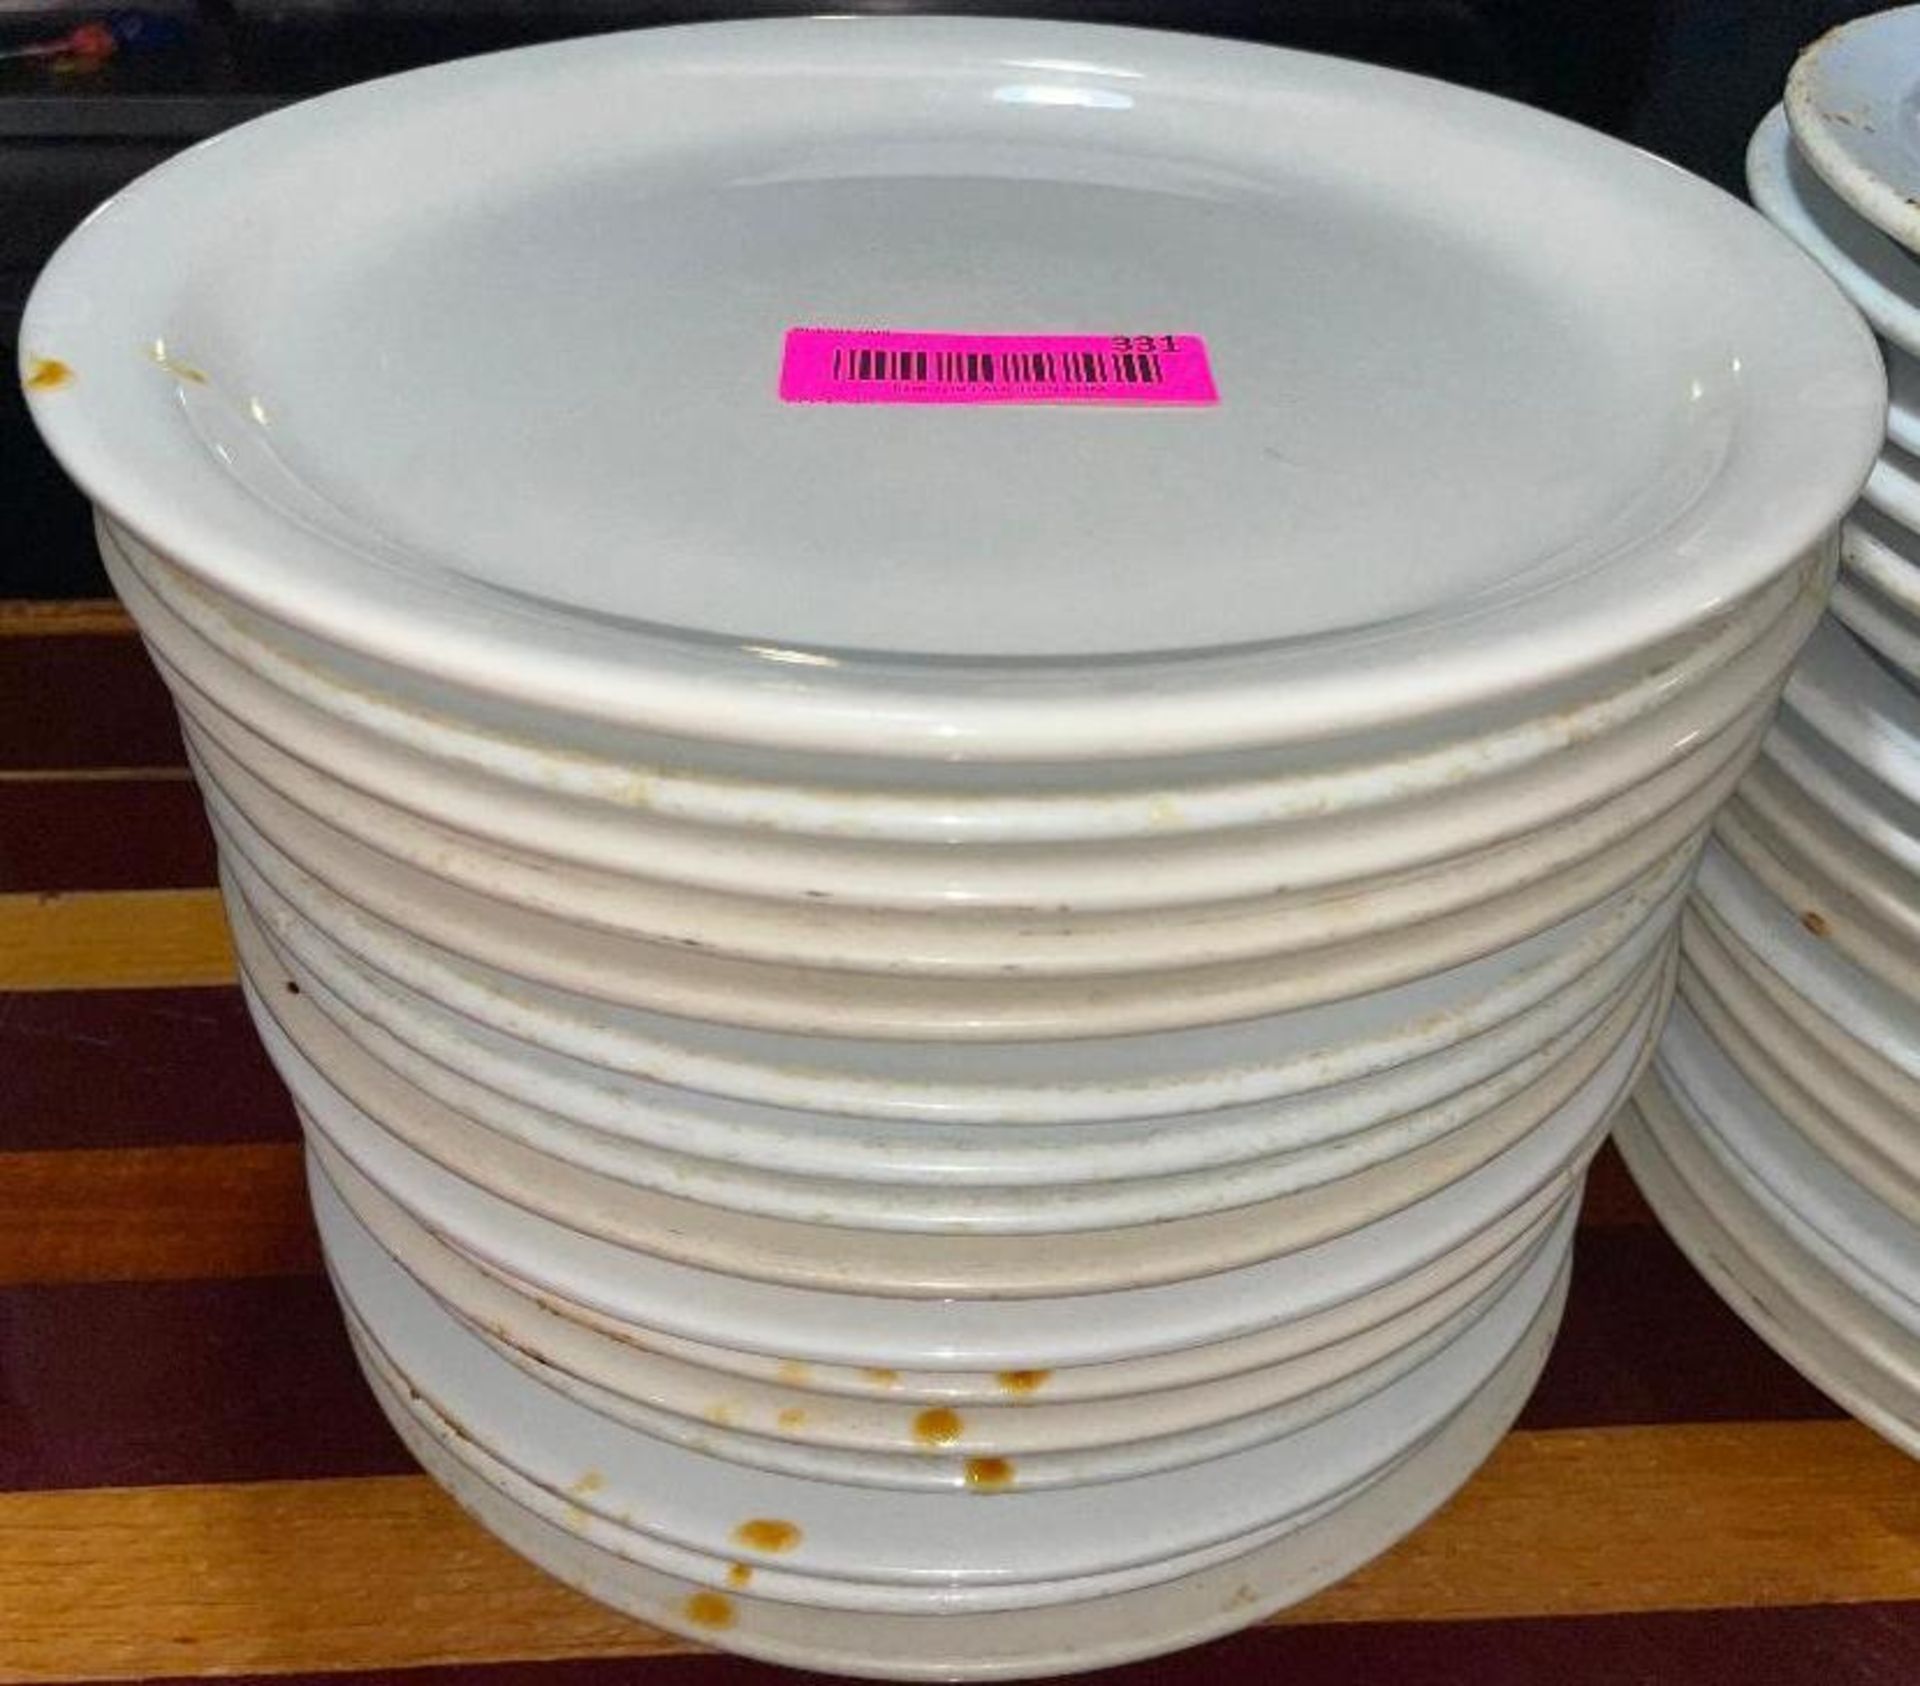 DESCRIPTION: (16) 10" CHINA PLATES SIZE 10" LOCATION: BAR THIS LOT IS: SOLD BY THE PIECE QTY: 16